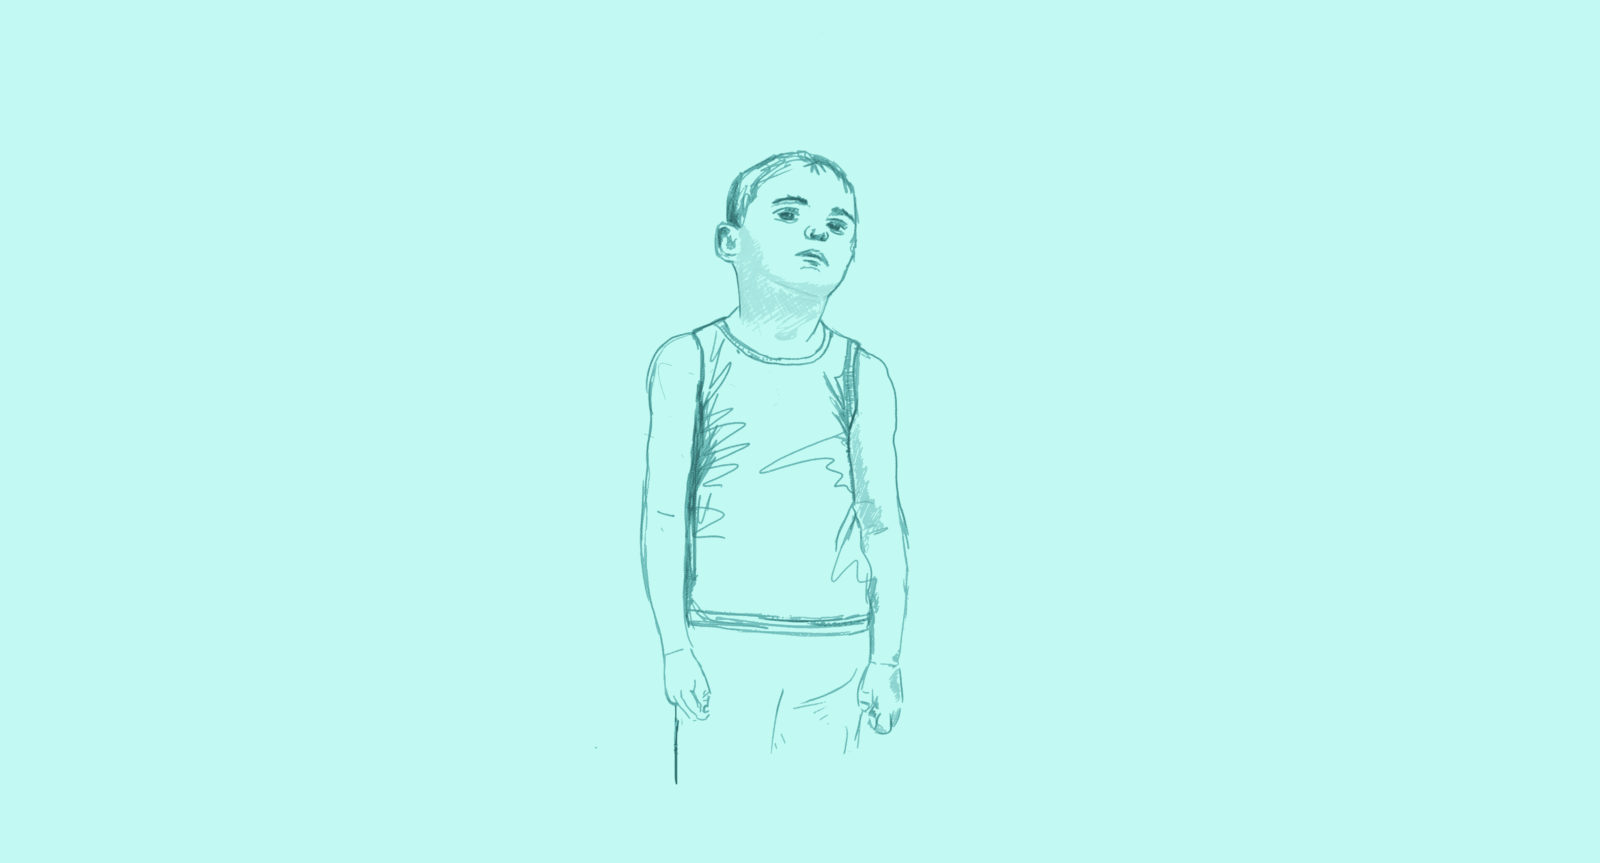 A hand drawn illustration of a young boy wearing a vest